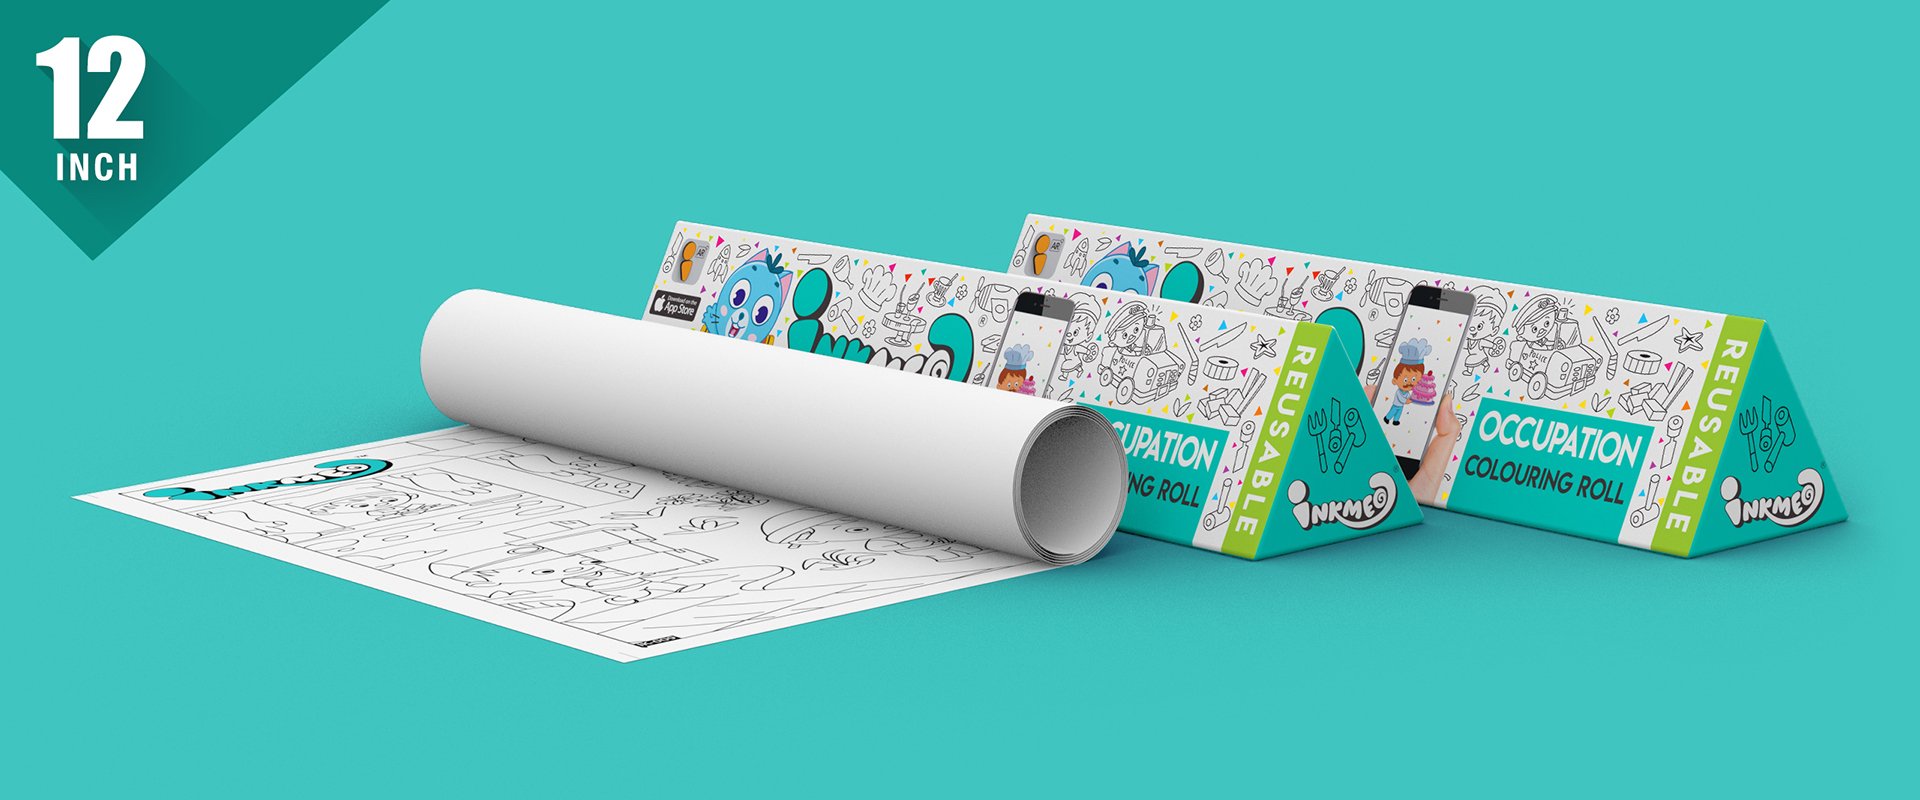 Occupation Colouring Roll (12 inch) - Inkmeo